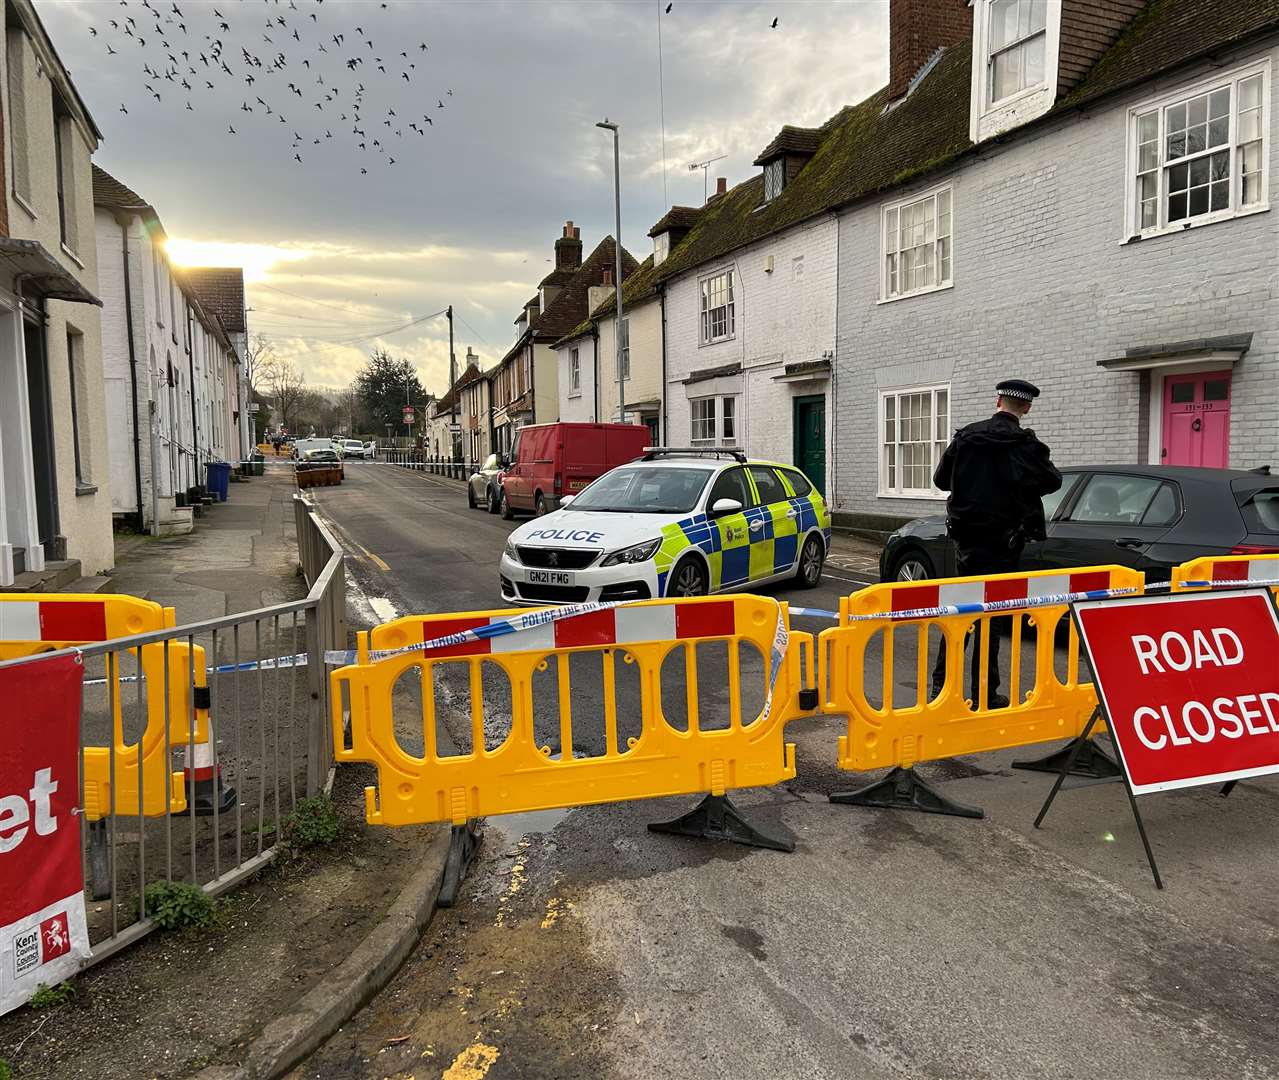 Police cordoned off the main route through the village after they launched a murder investigation